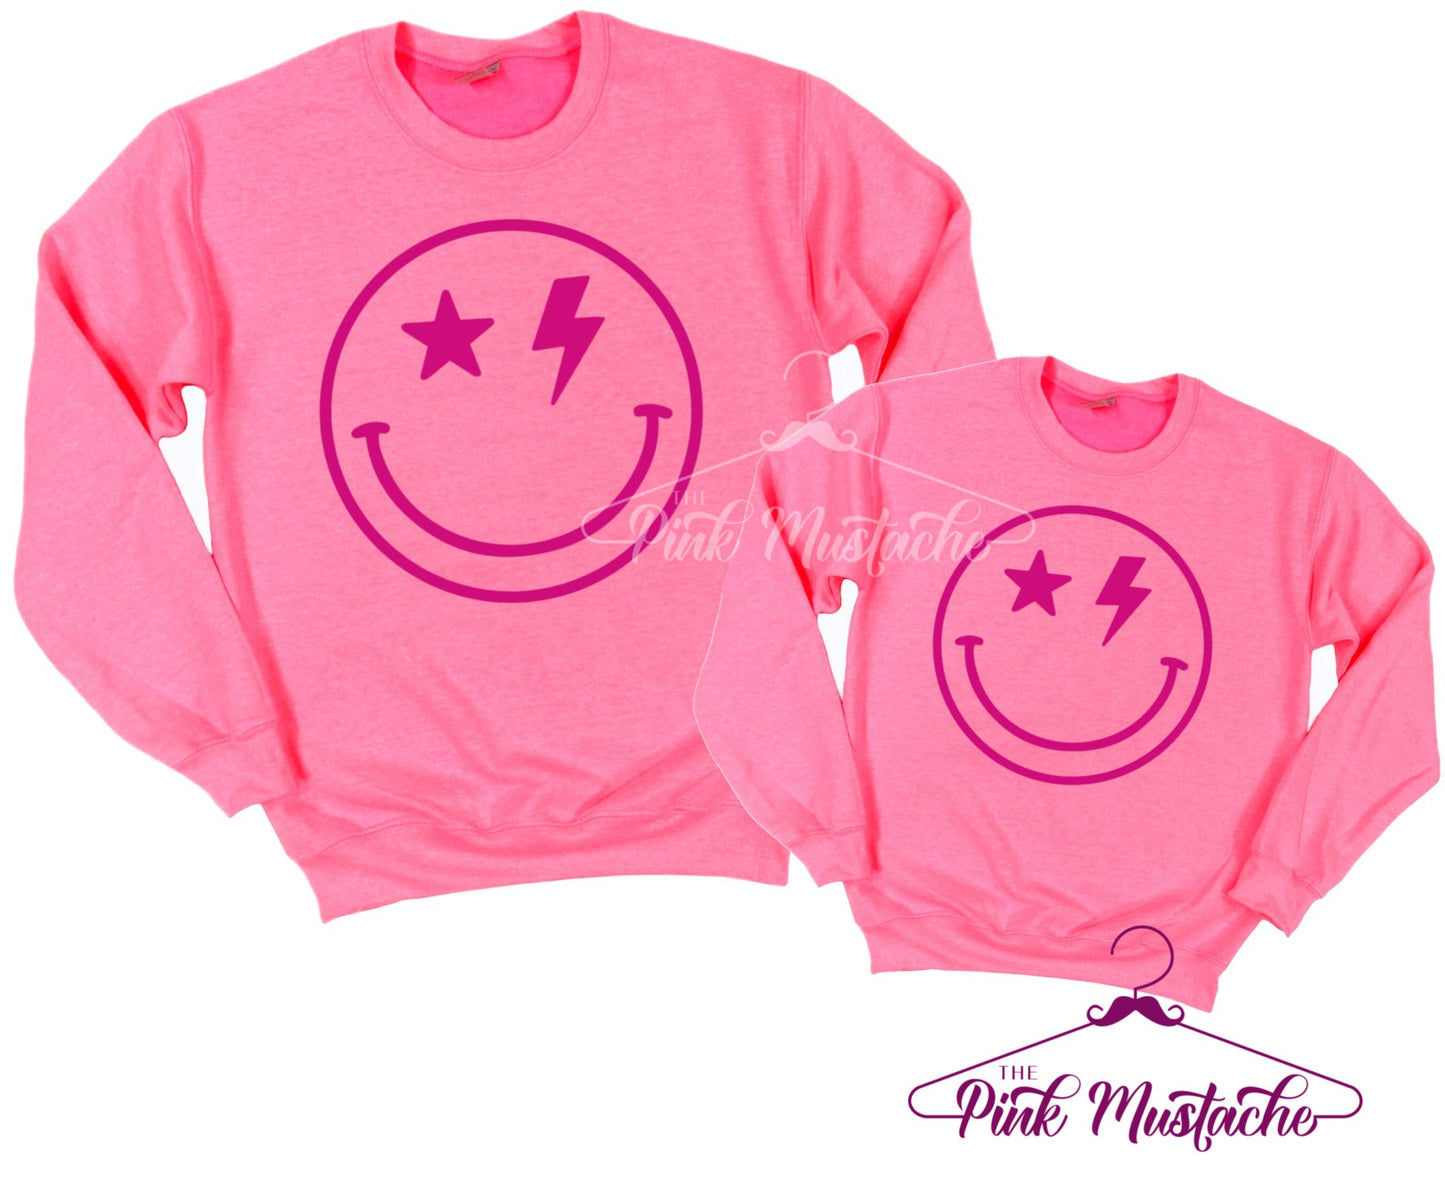 Safety Pink Smiley Face Sweatshirt/ Super Cute Unisex Sized Sweatshirt/ Youth and Adult Options